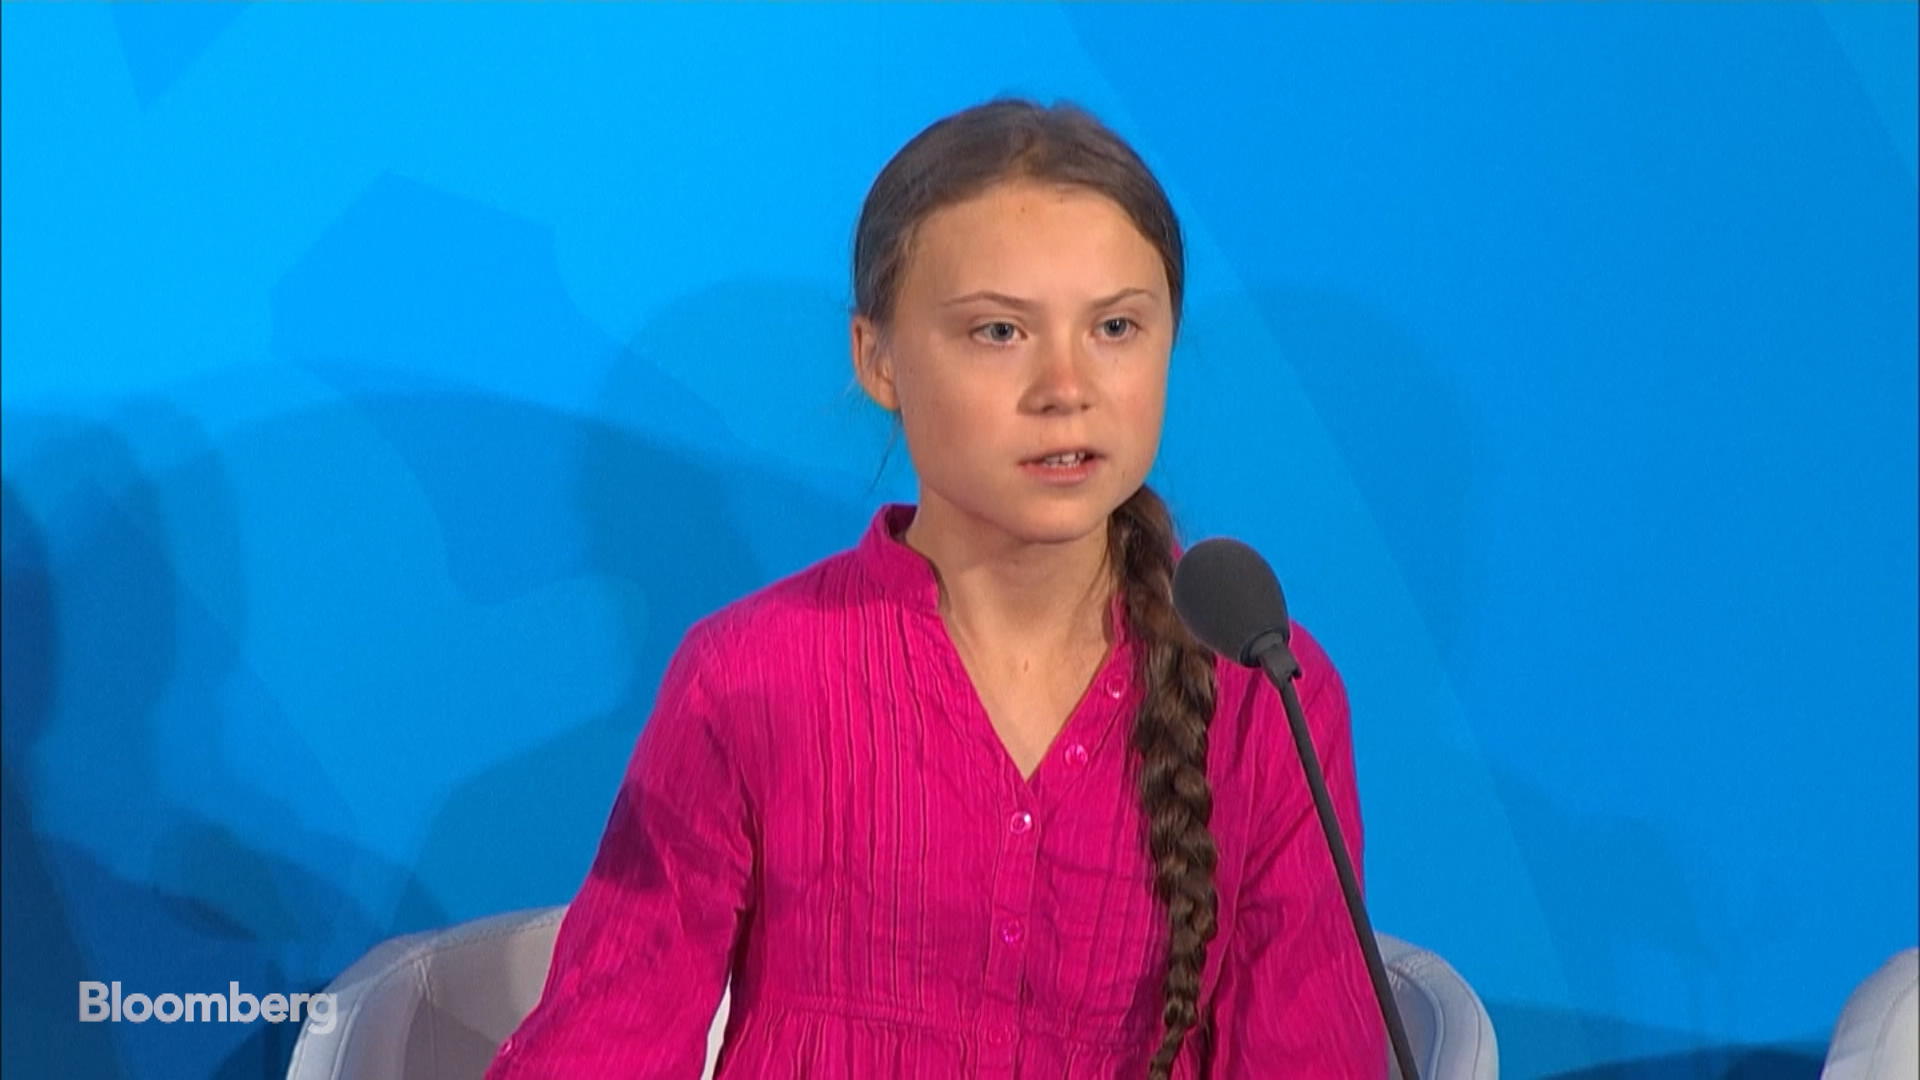 Teen Activist Thunberg to World Leaders: 'How Dare You!'